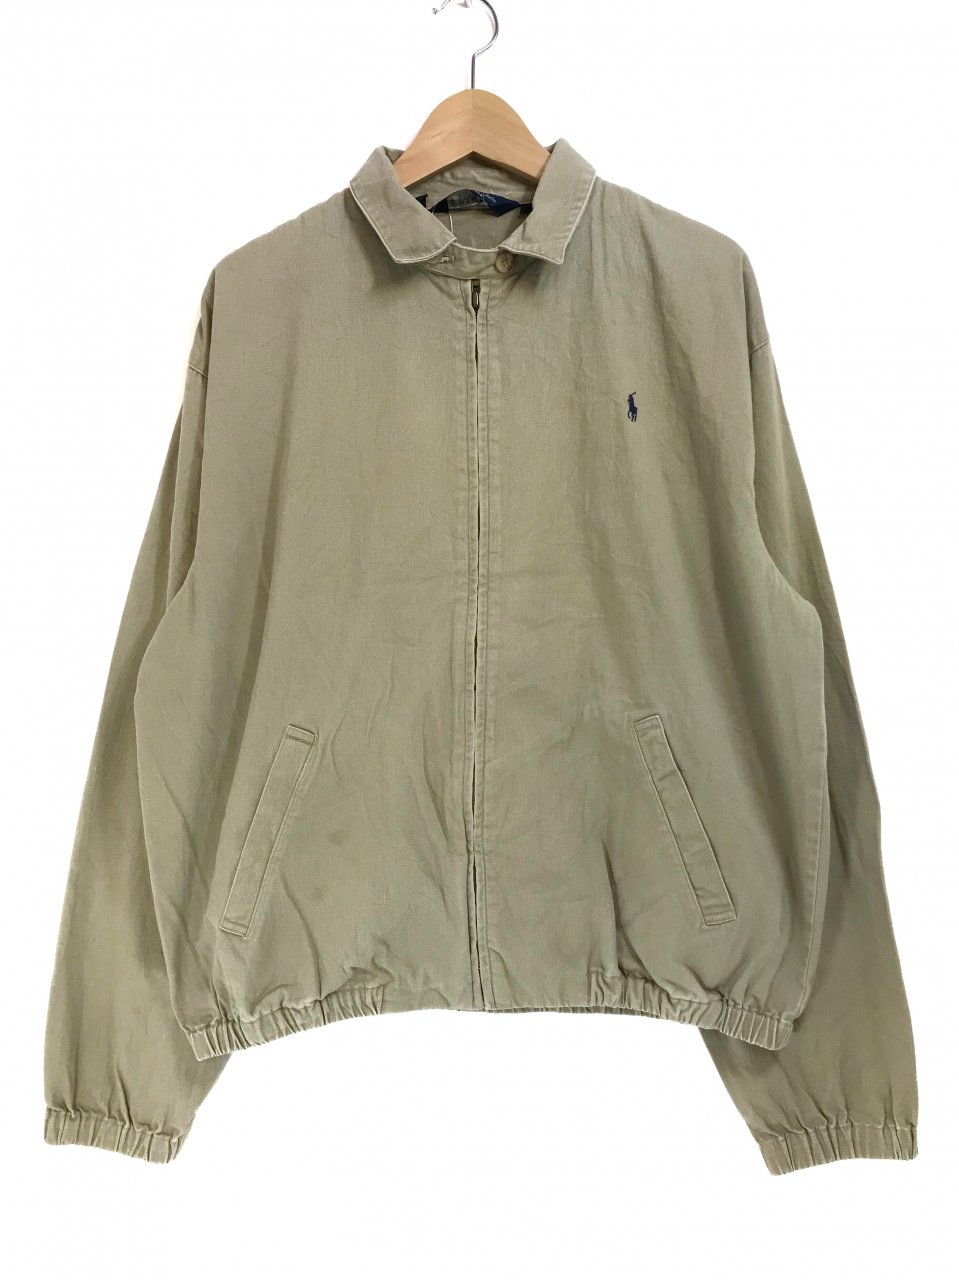 USA製 80s～90s Polo Ralph Lauren Cotton Drizzler Jacket カーキ M